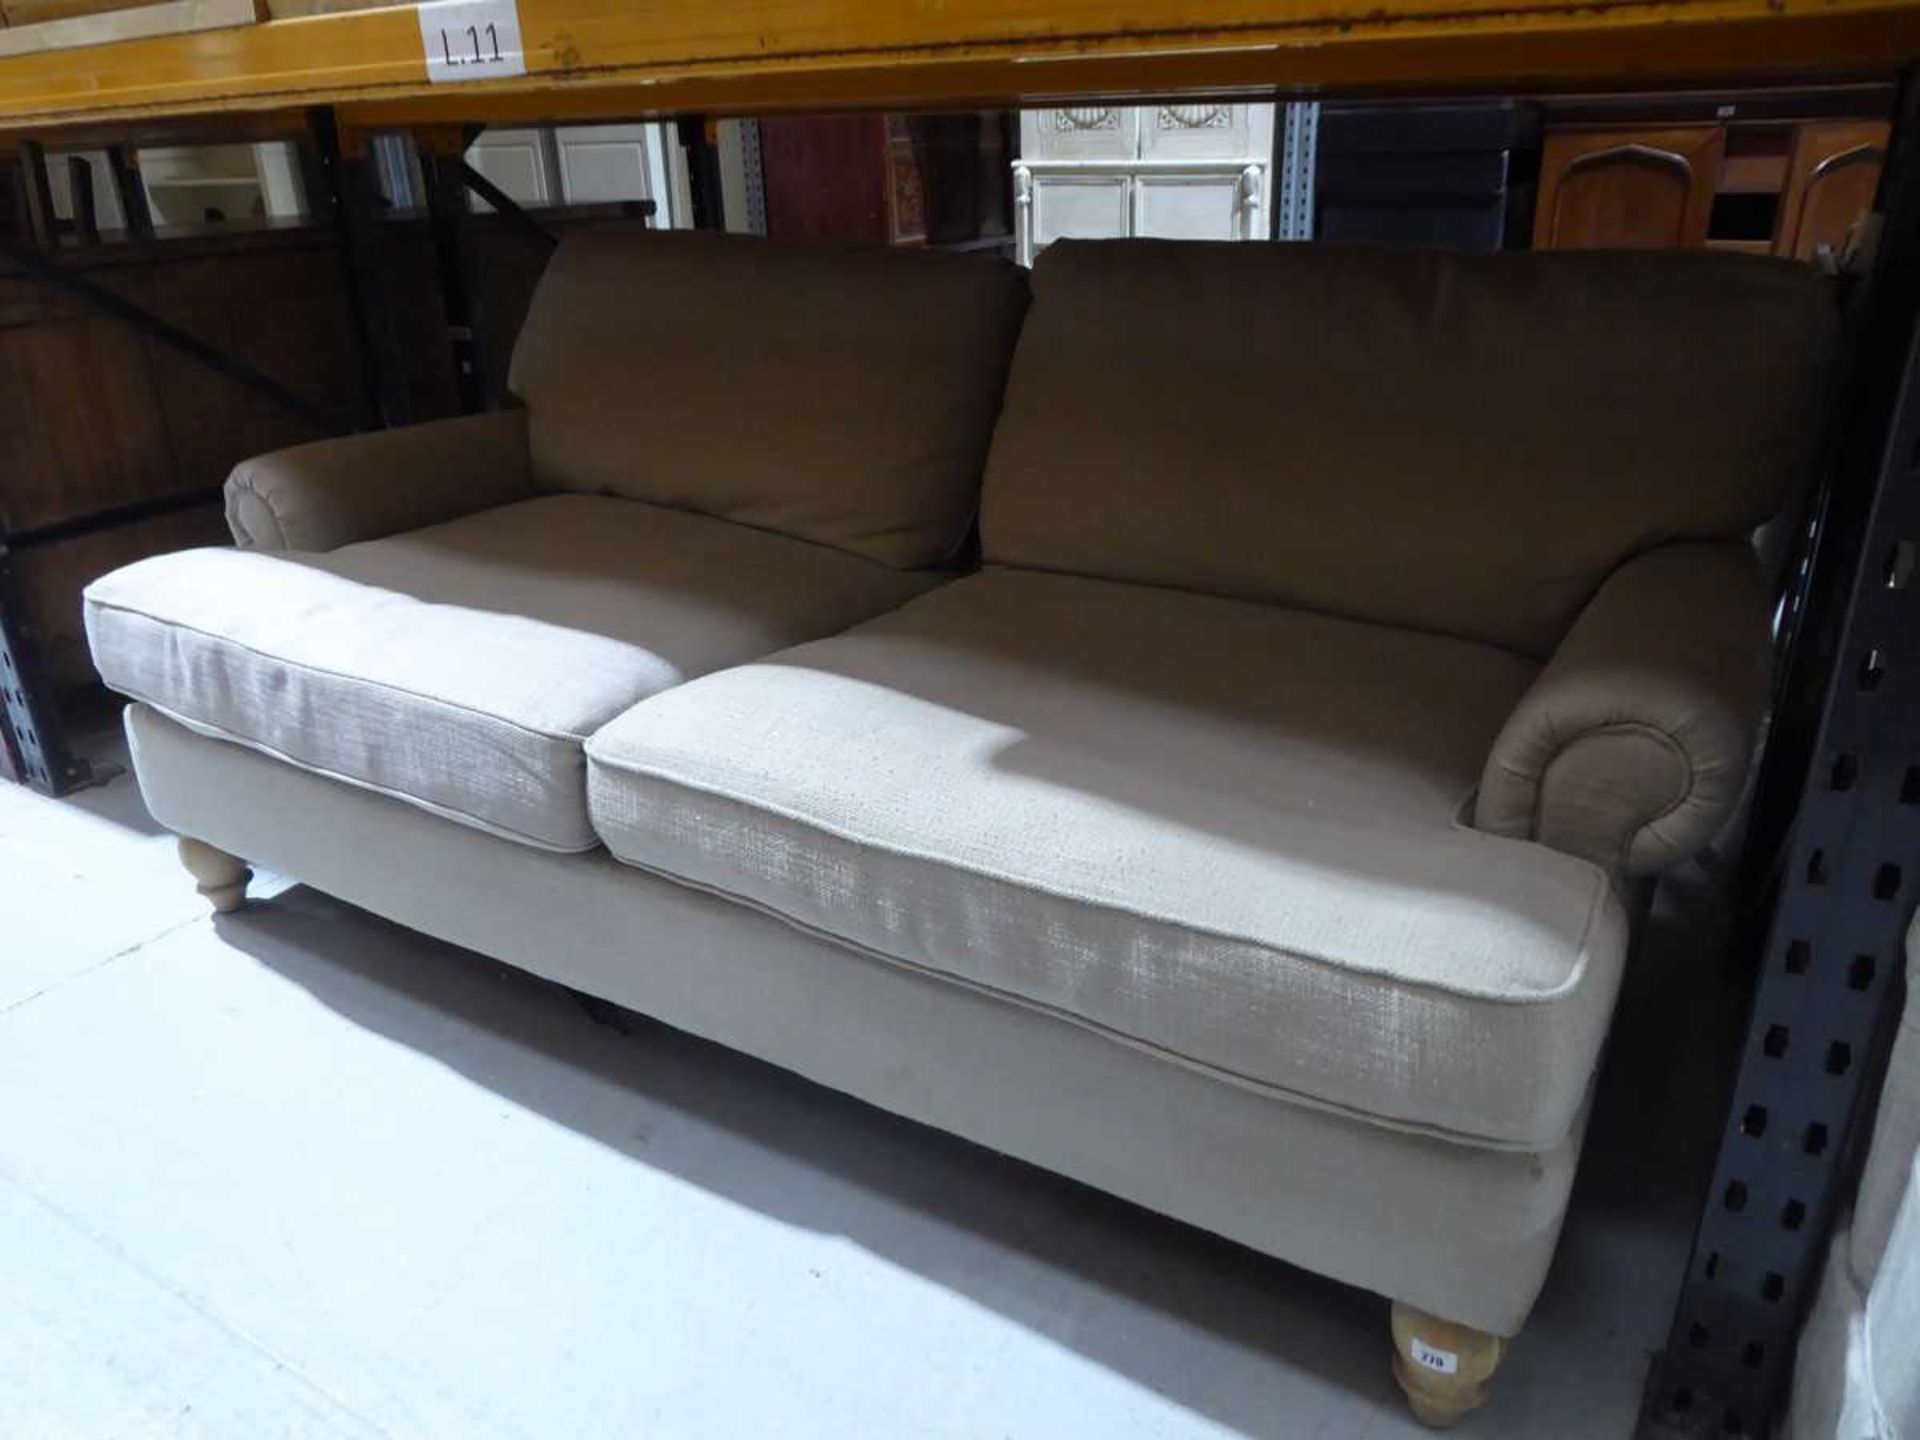 +VAT Large 2 seater chesterfield style sofa in oatmeal material Dimensions are 200 x 120 x 51cm high